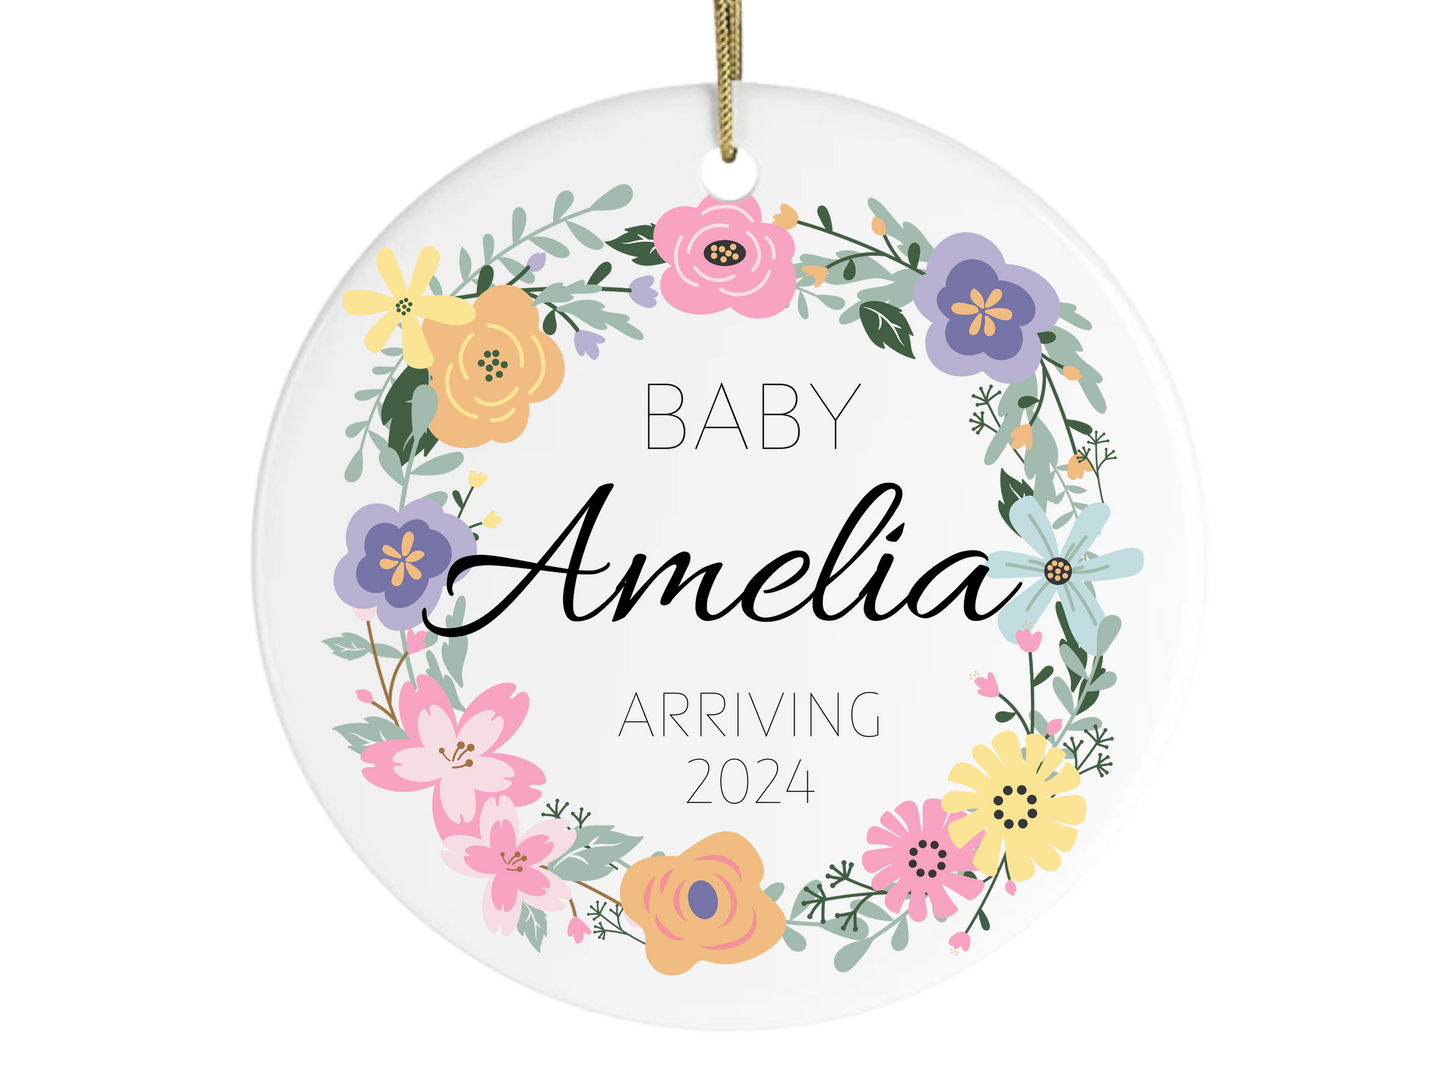 baby first Christmas ornament personalized name newborn gift for baby announcement 